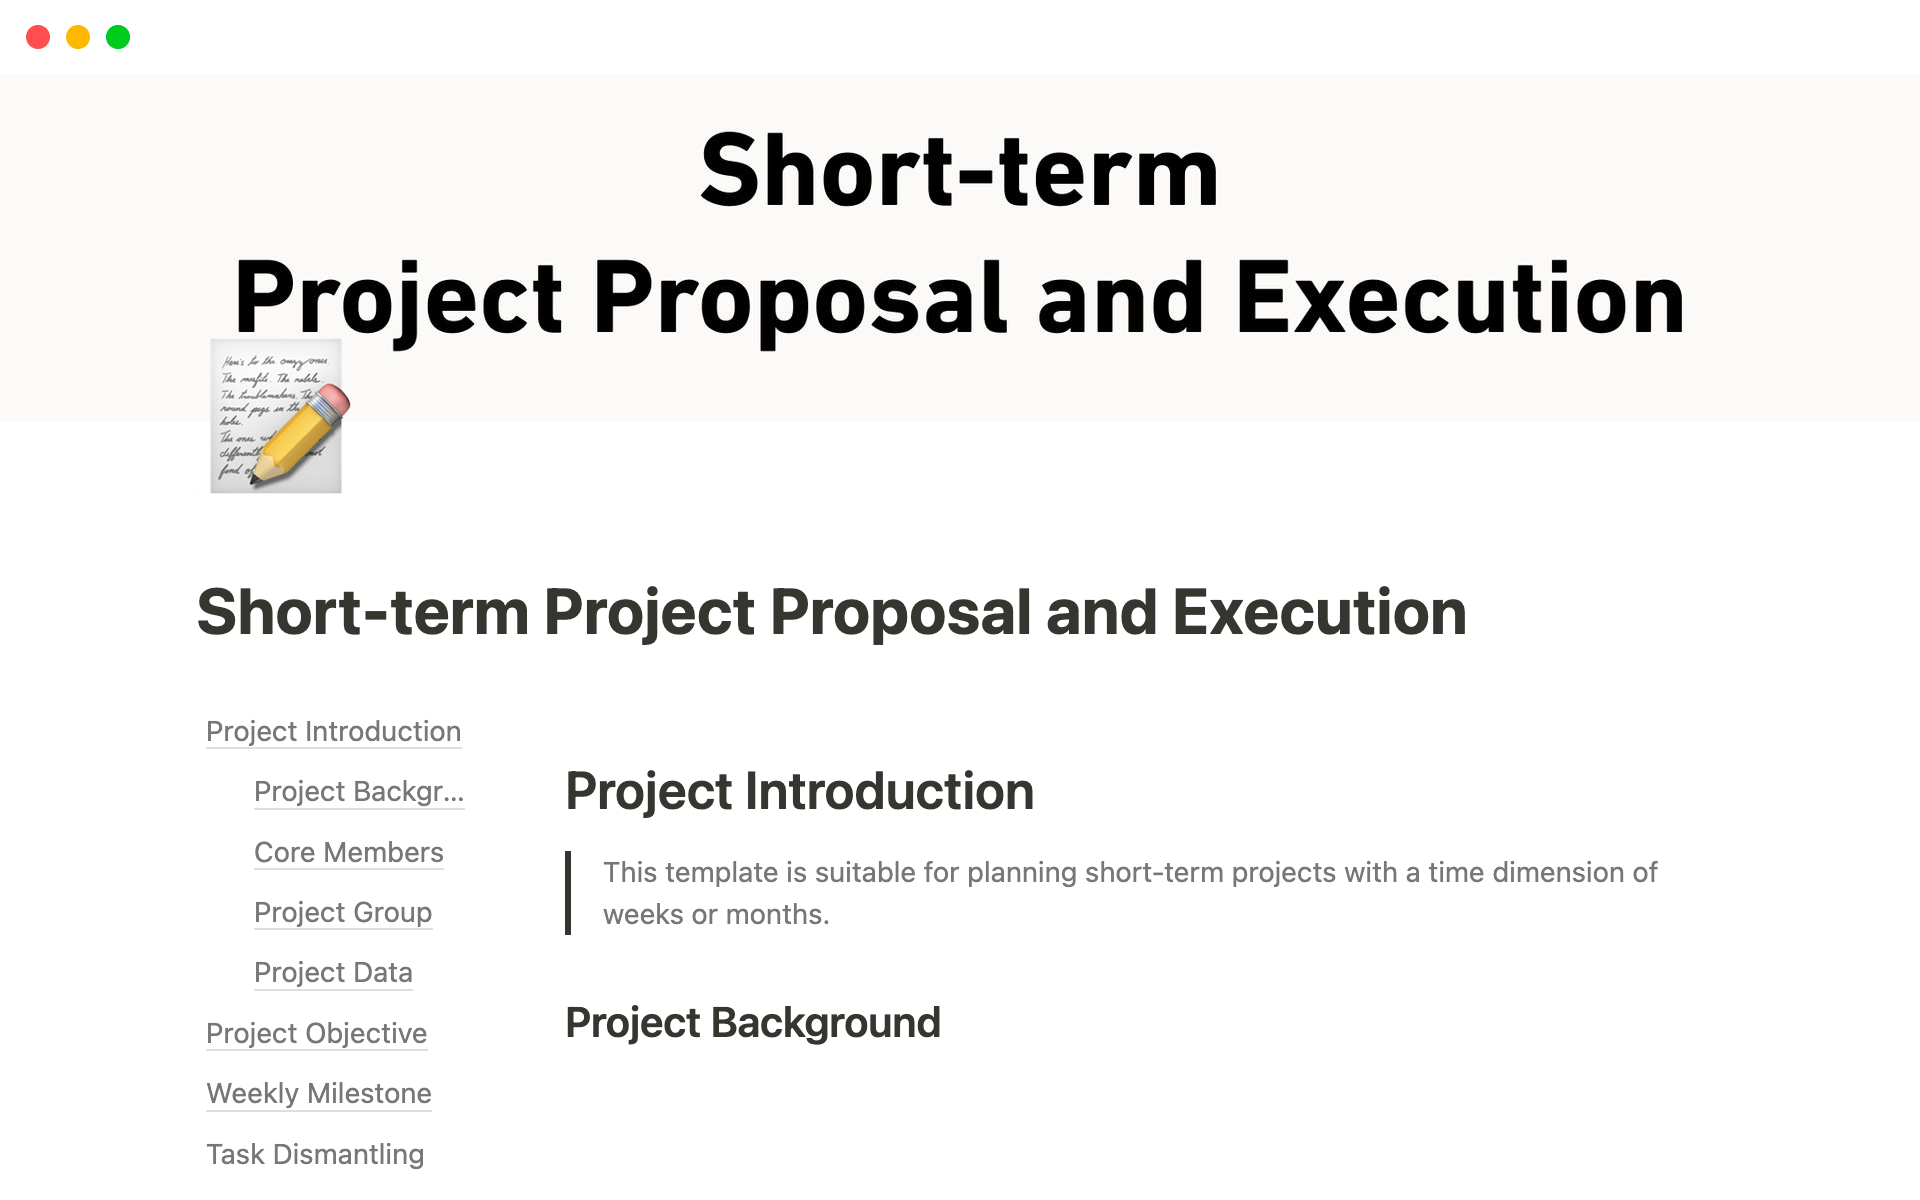 Efficient Execution of Short-term Projects